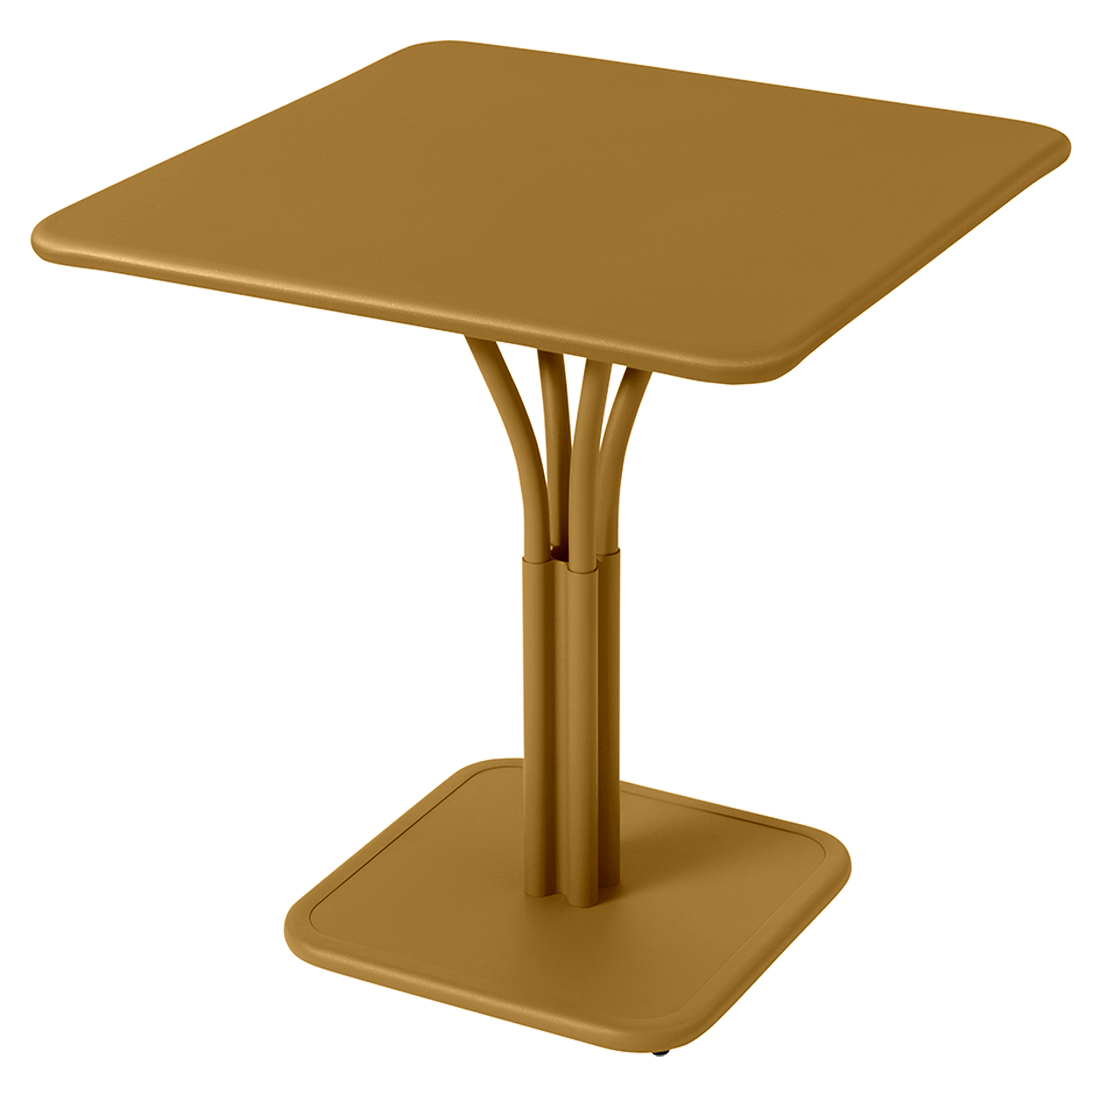 LUXEMBOURG PEDESTAL TABLE WITH SOLID TOP 71 X 71 CM